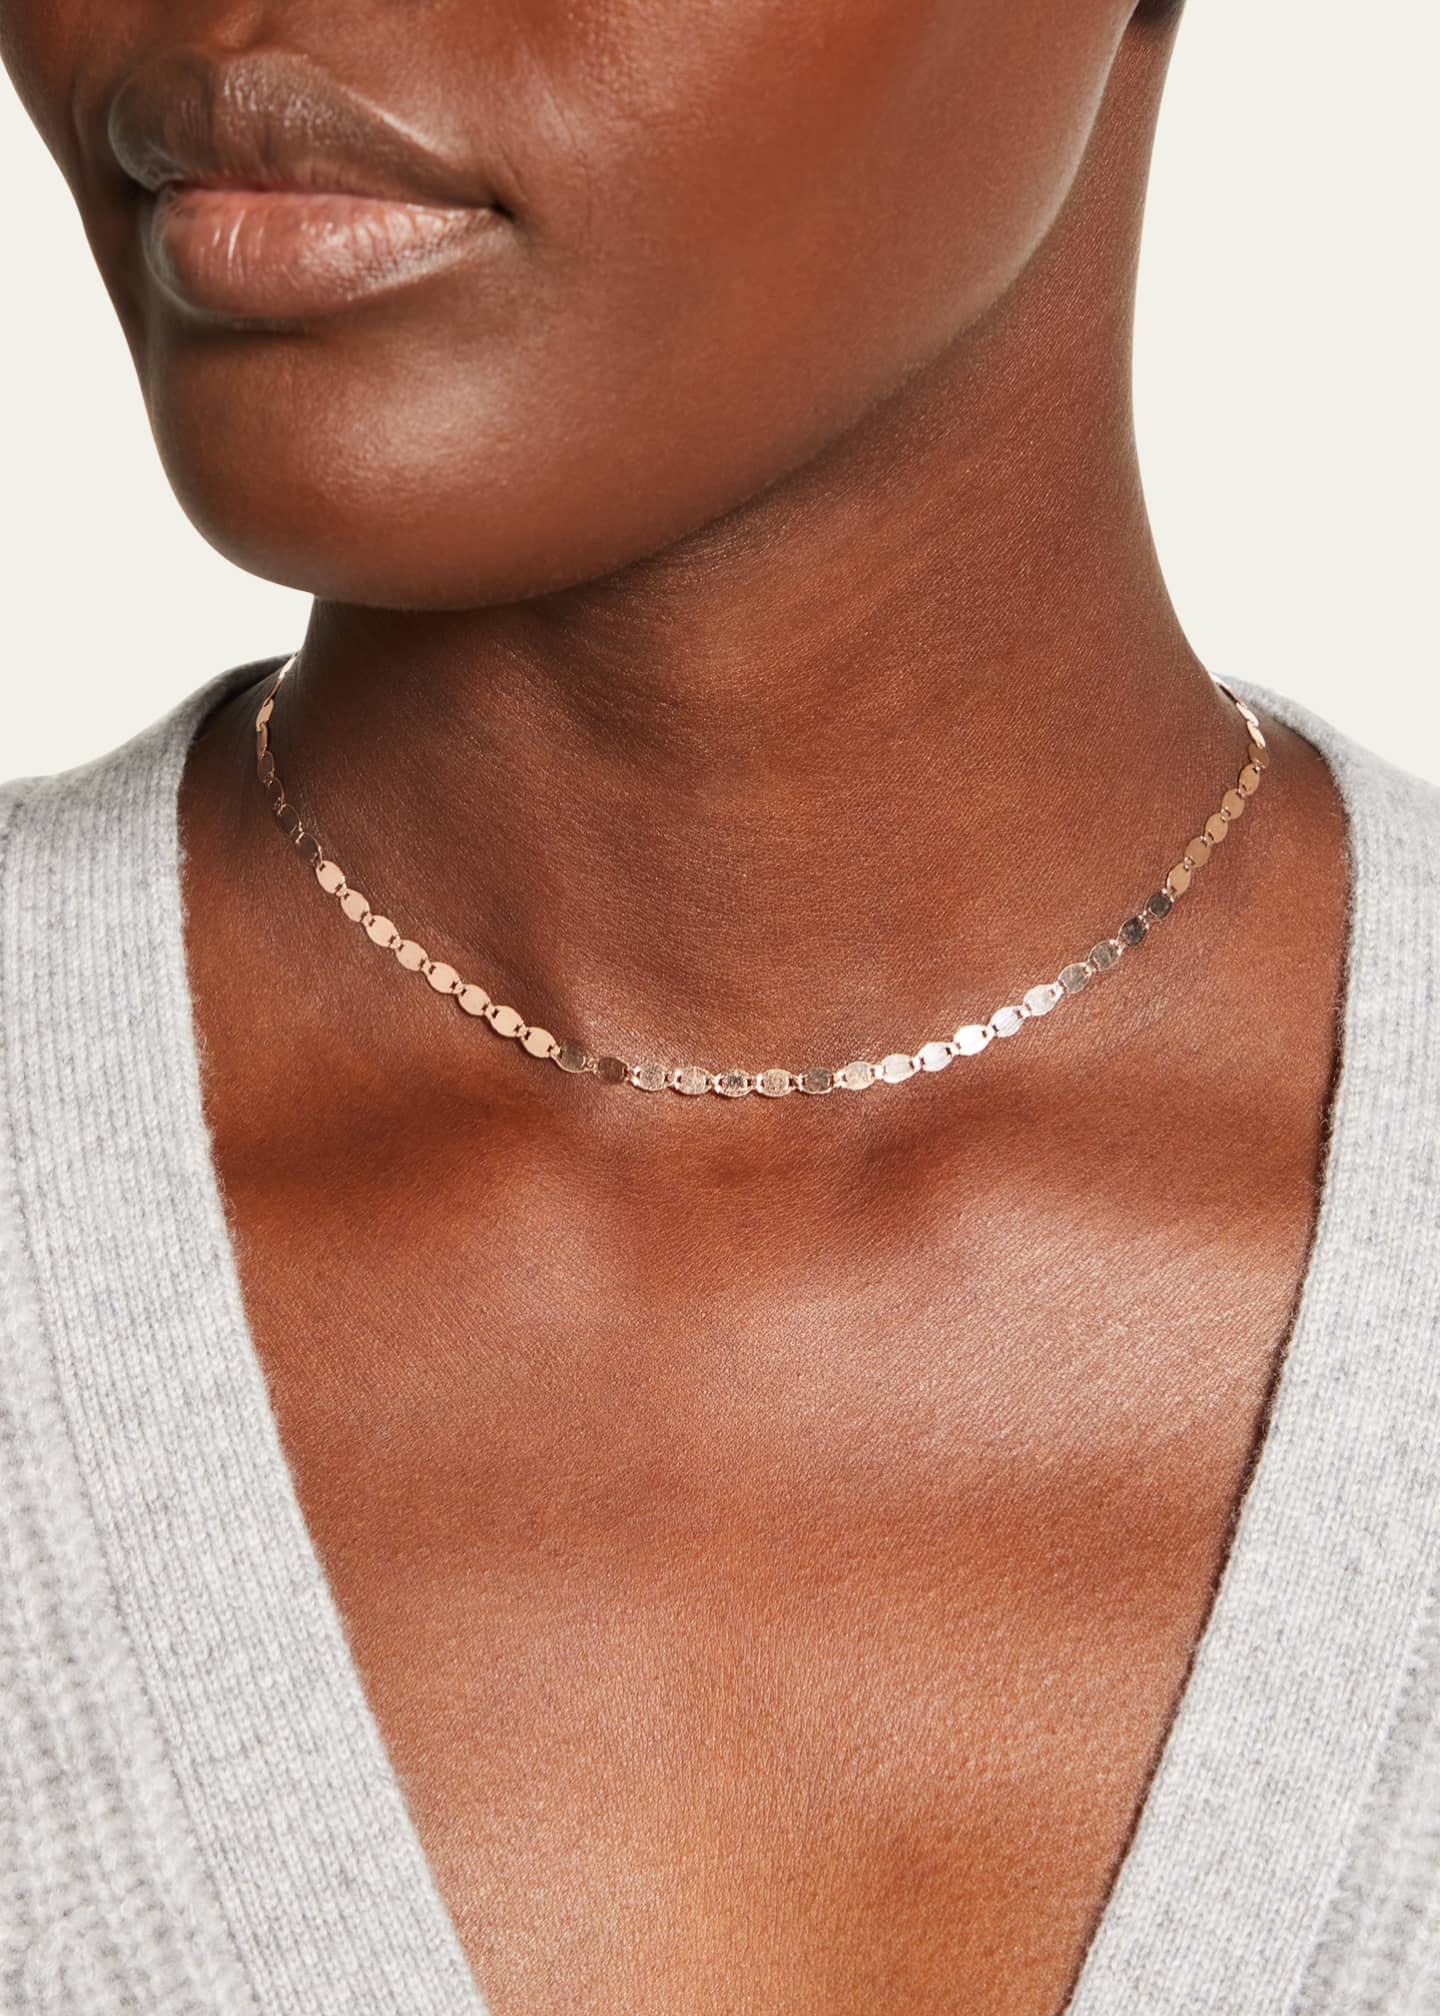 Lana 14k Large Nude Chain Choker Necklace Image 2 of 4